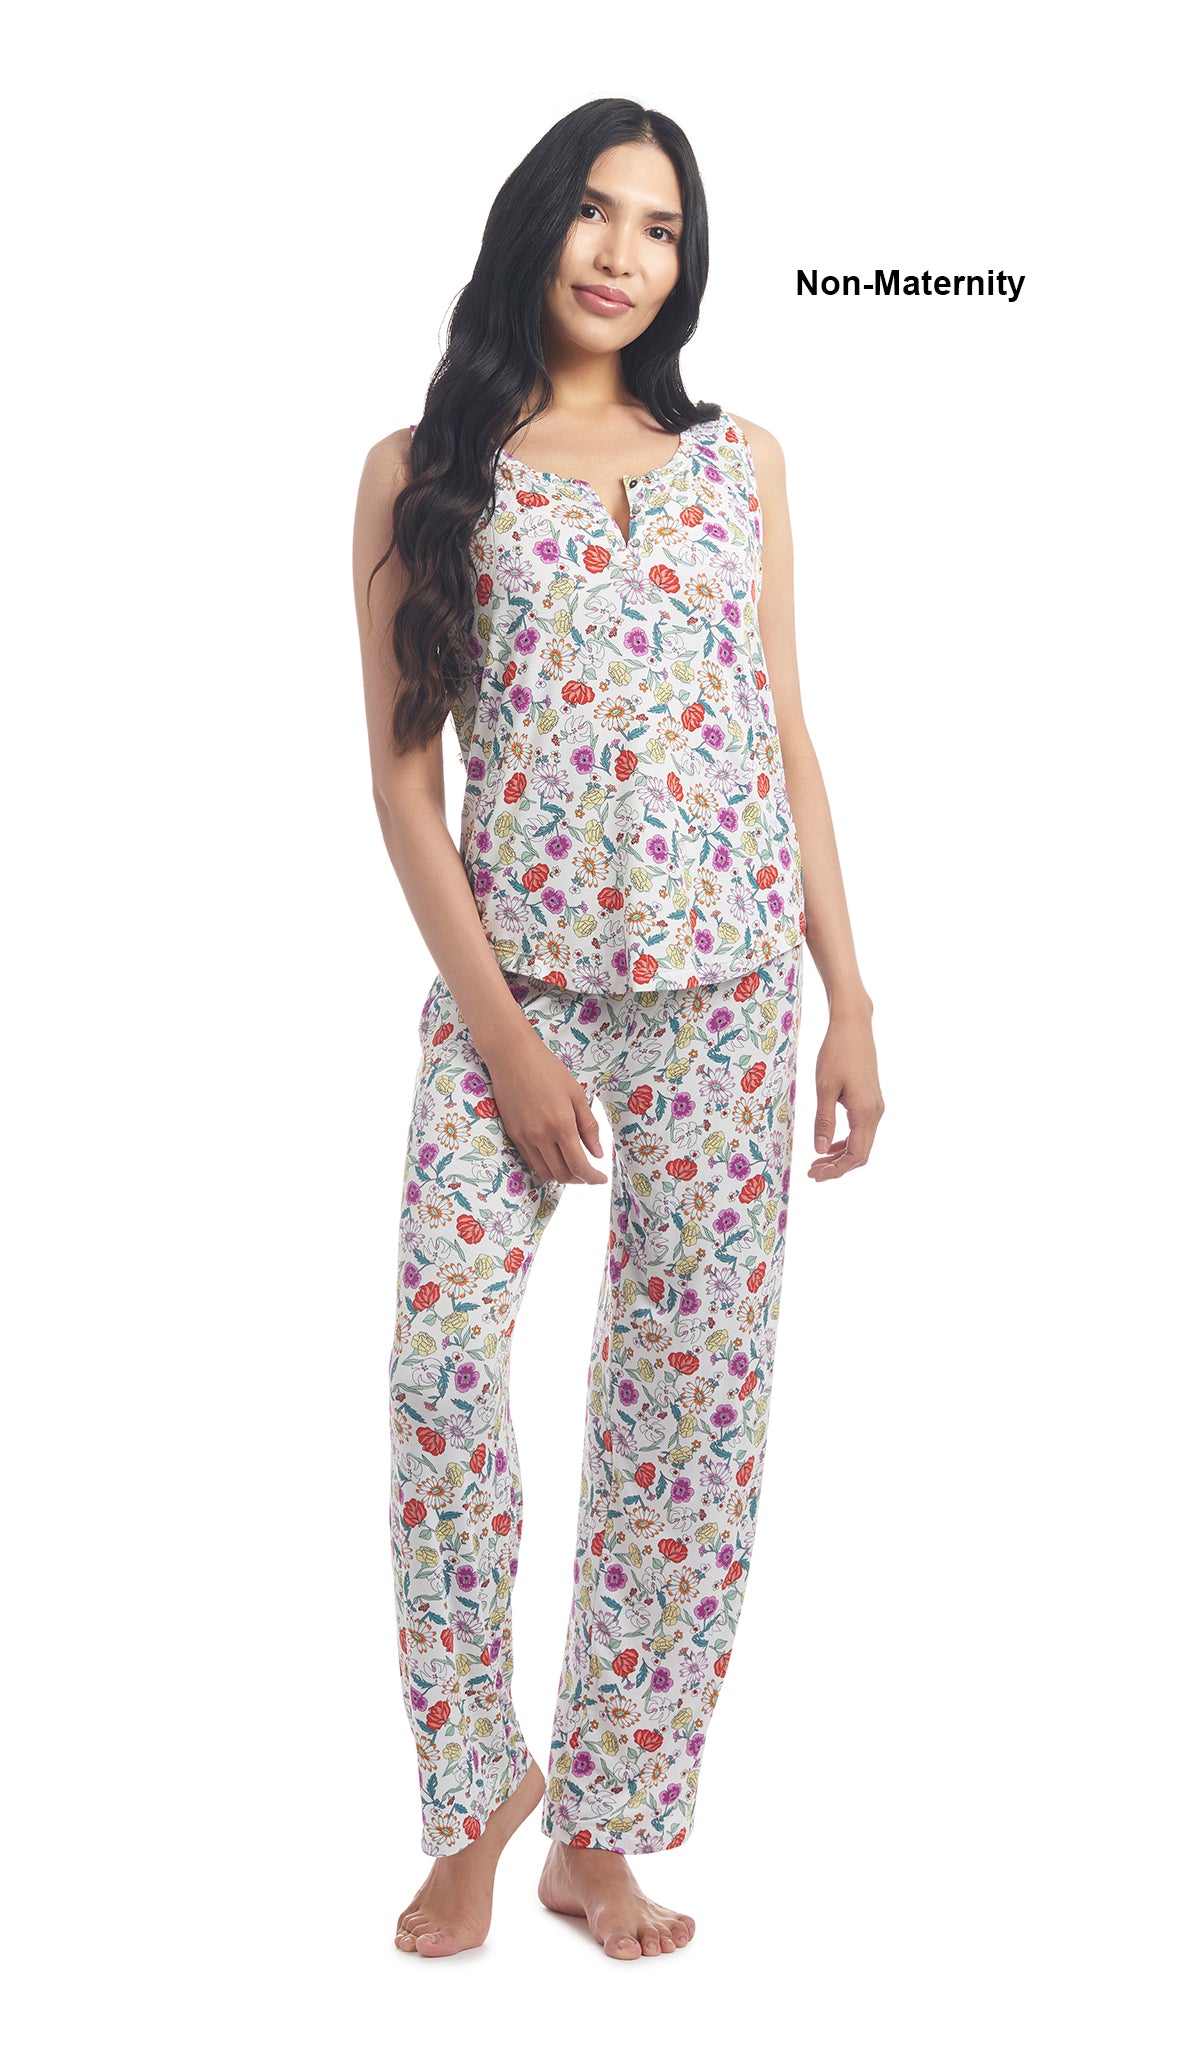 Zinnia Joy 2-Piece Set. Woman wearing button front placket tank top and pant as non-maternity.